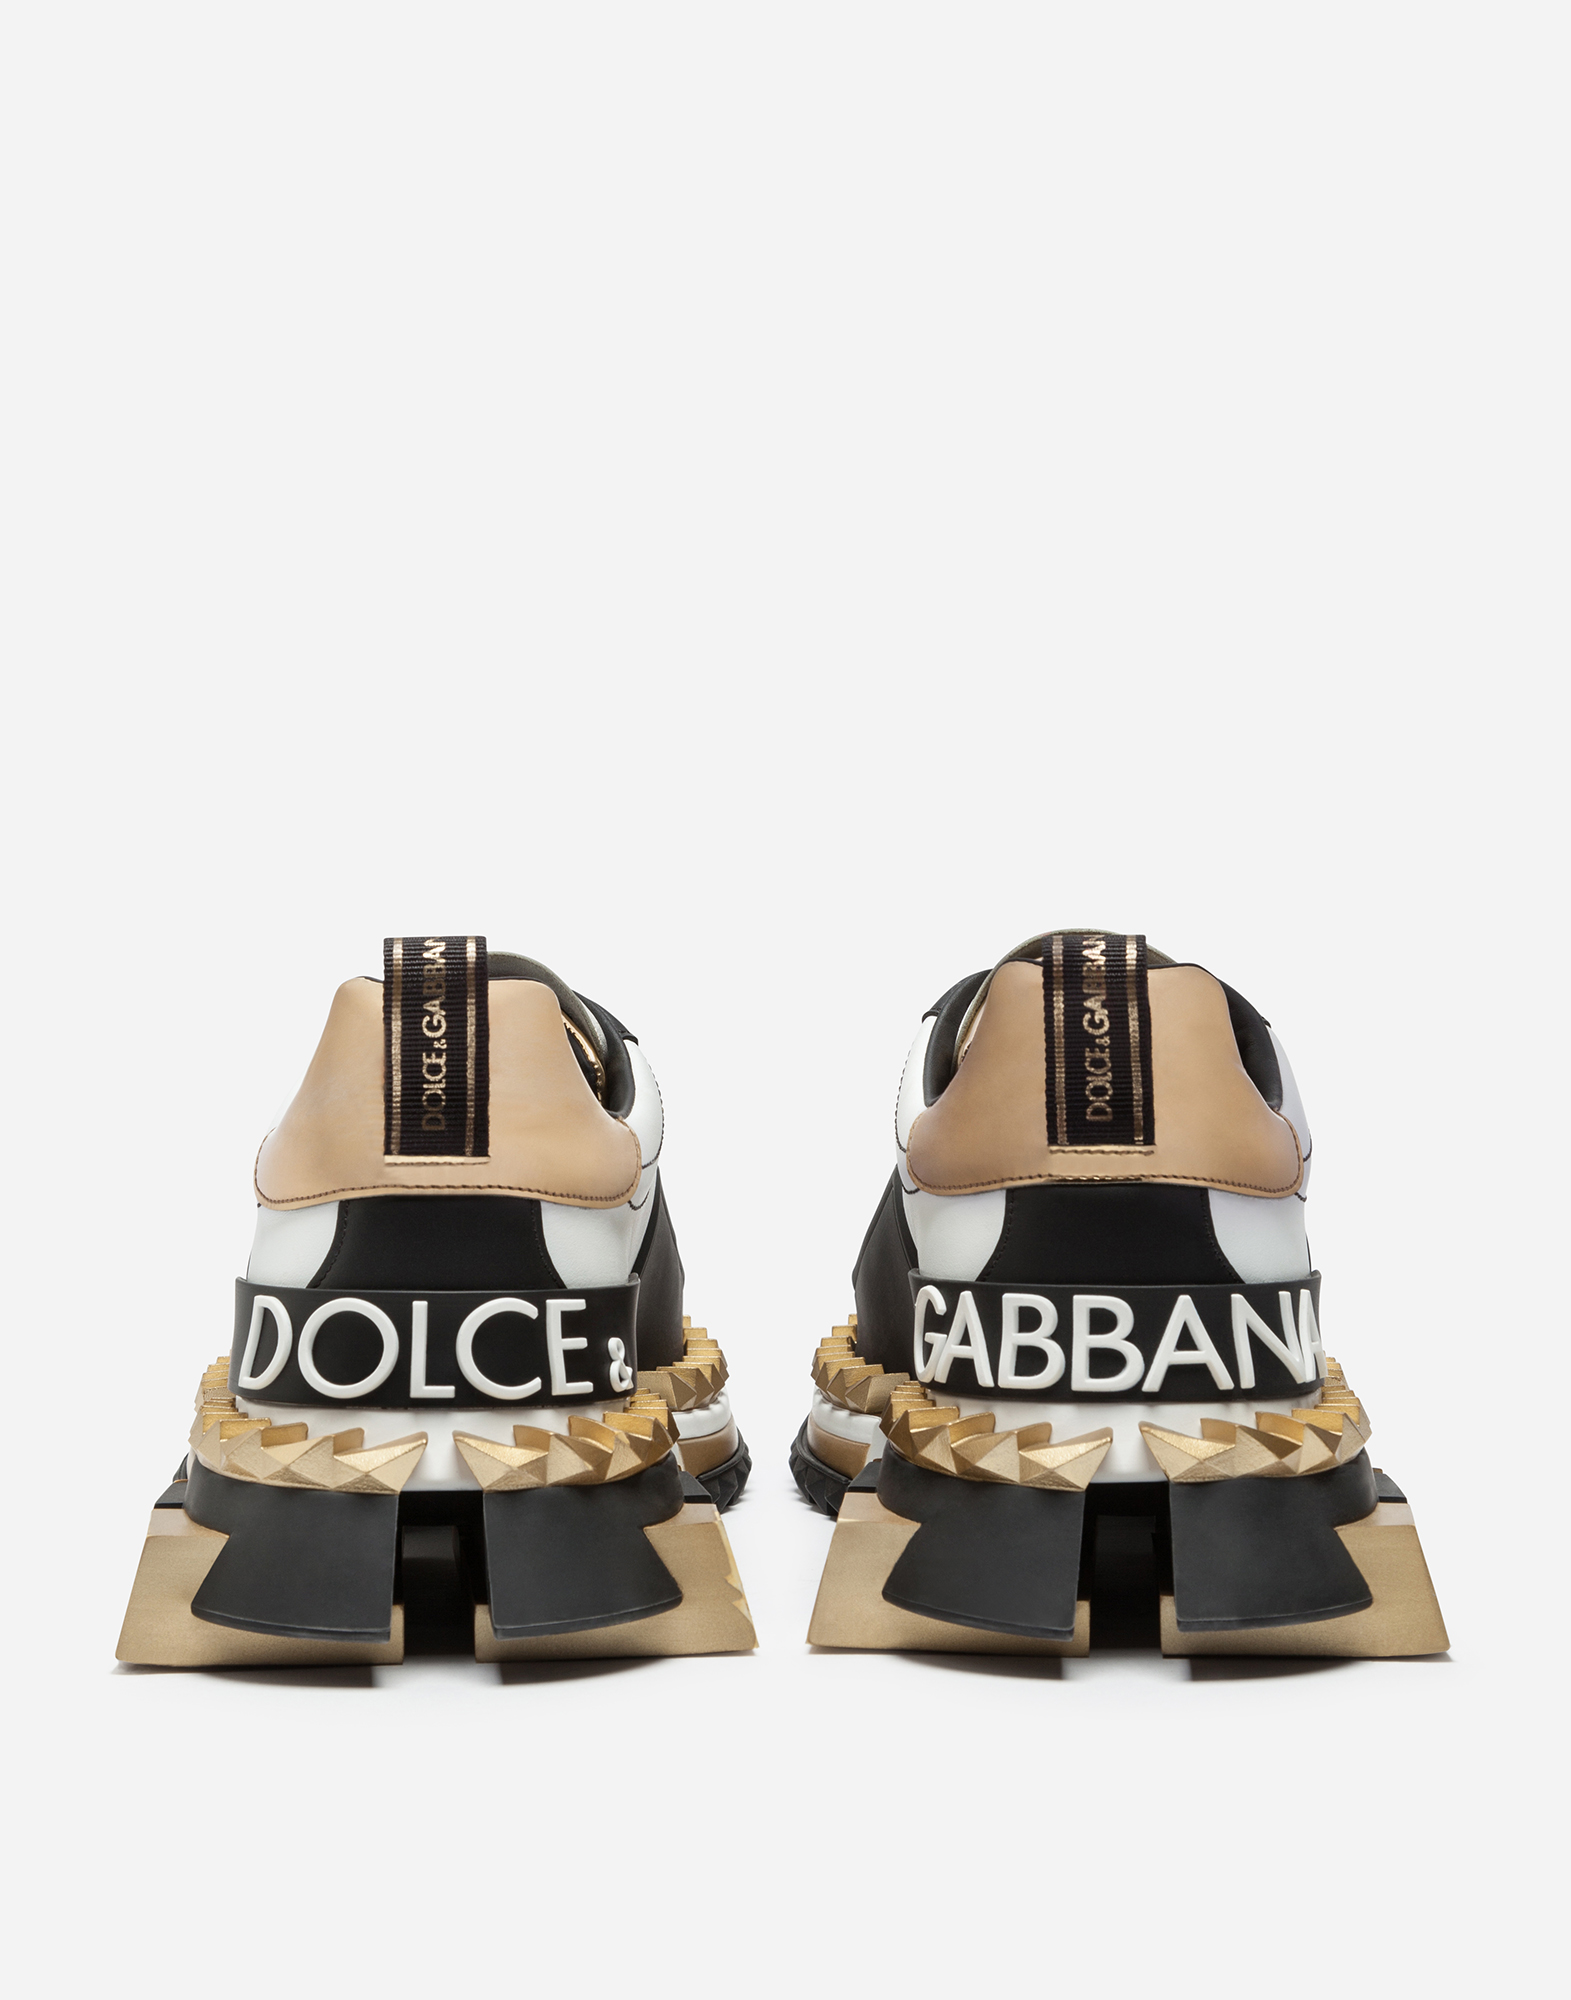 dolce and gabbana super king sneakers price